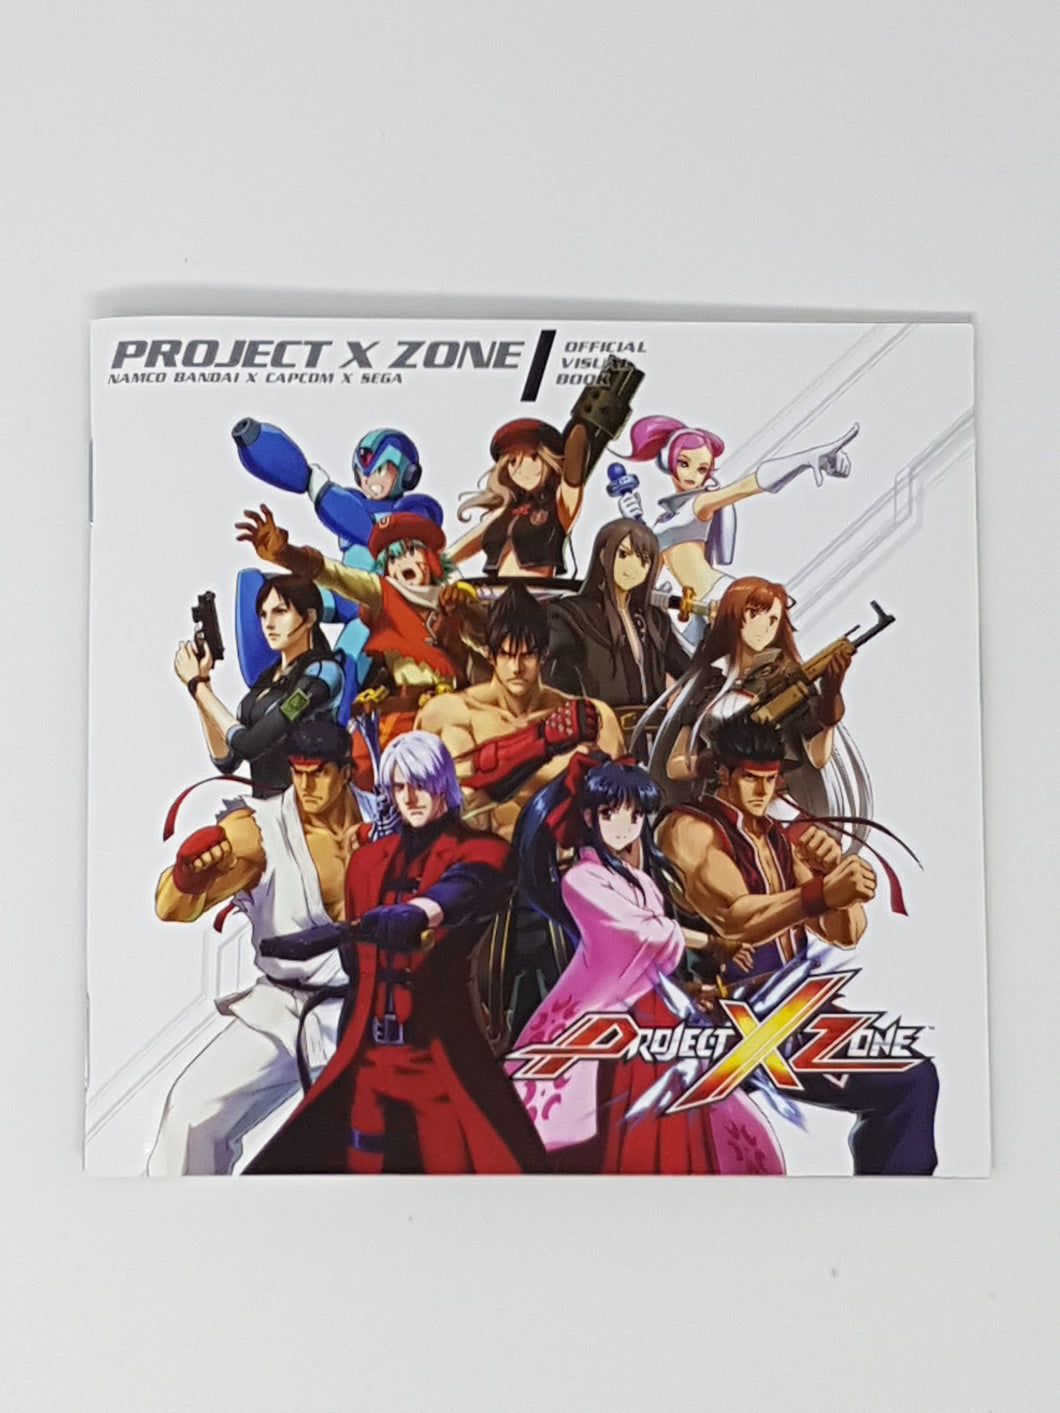 Project X Zone - Limited Edition [manual] - Nintendo 3DS